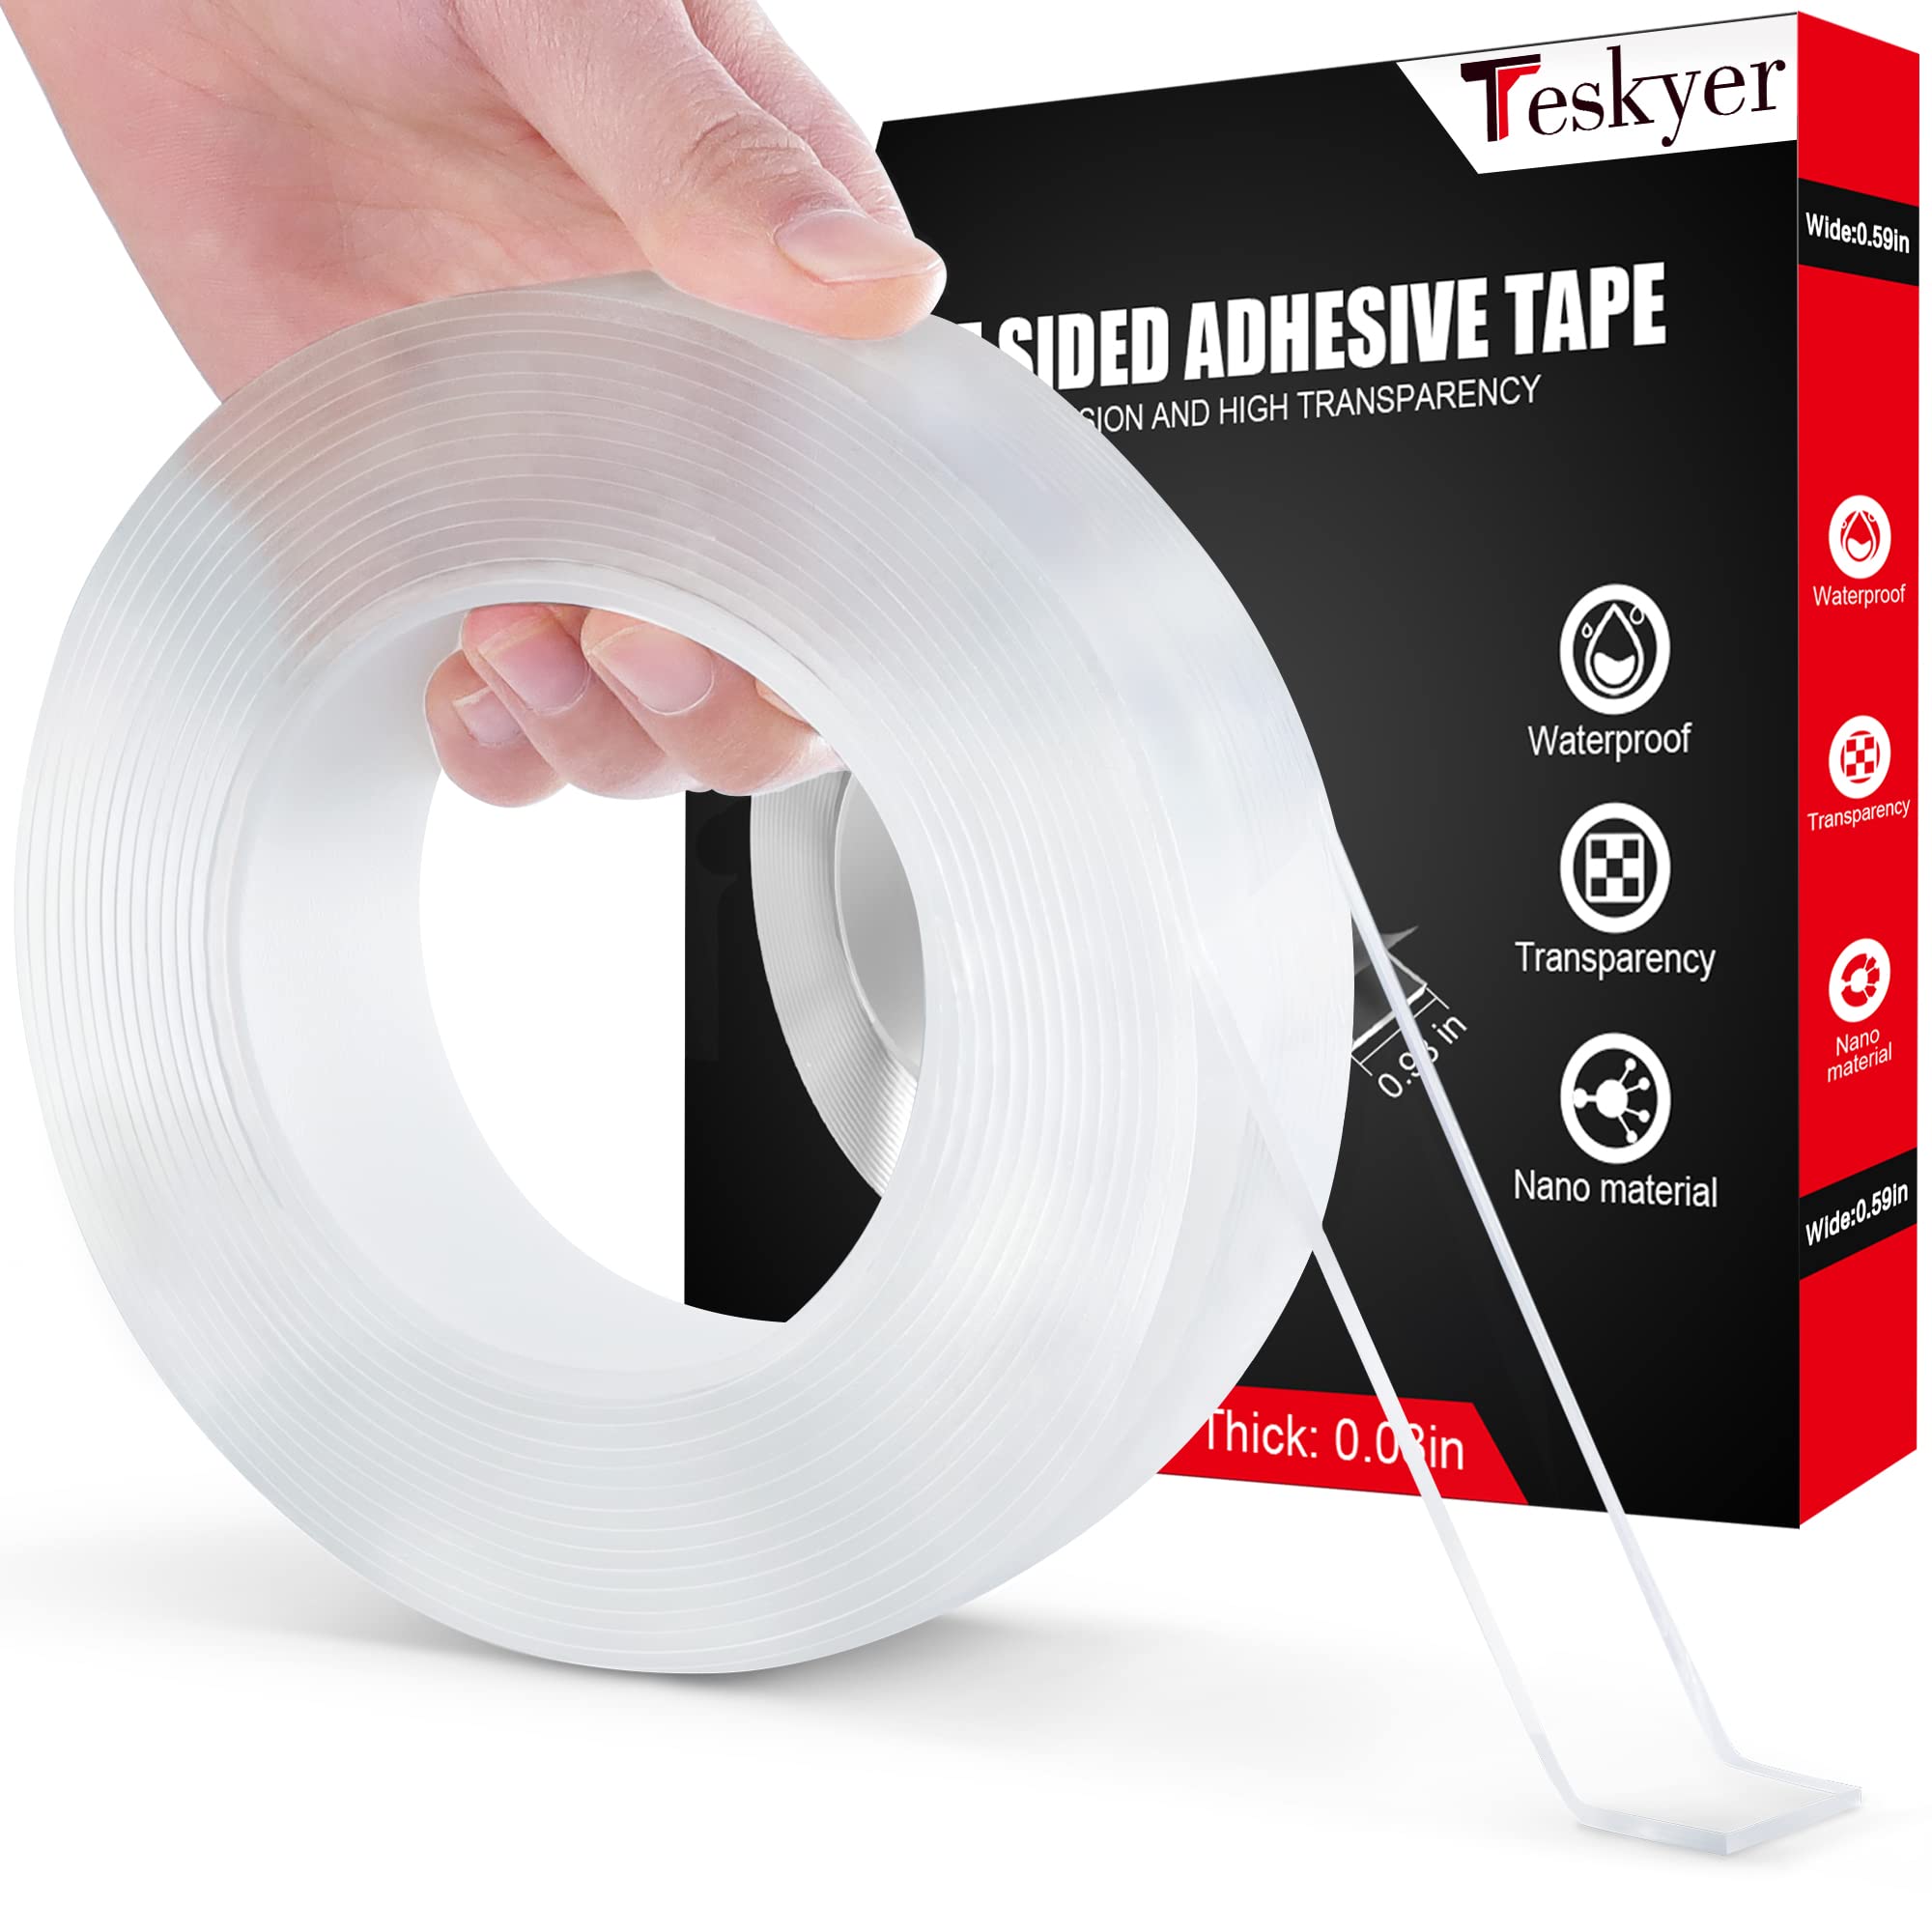 Teskyer Double Sided Tape Heavy Duty Strong Adhesive Mounting Tape